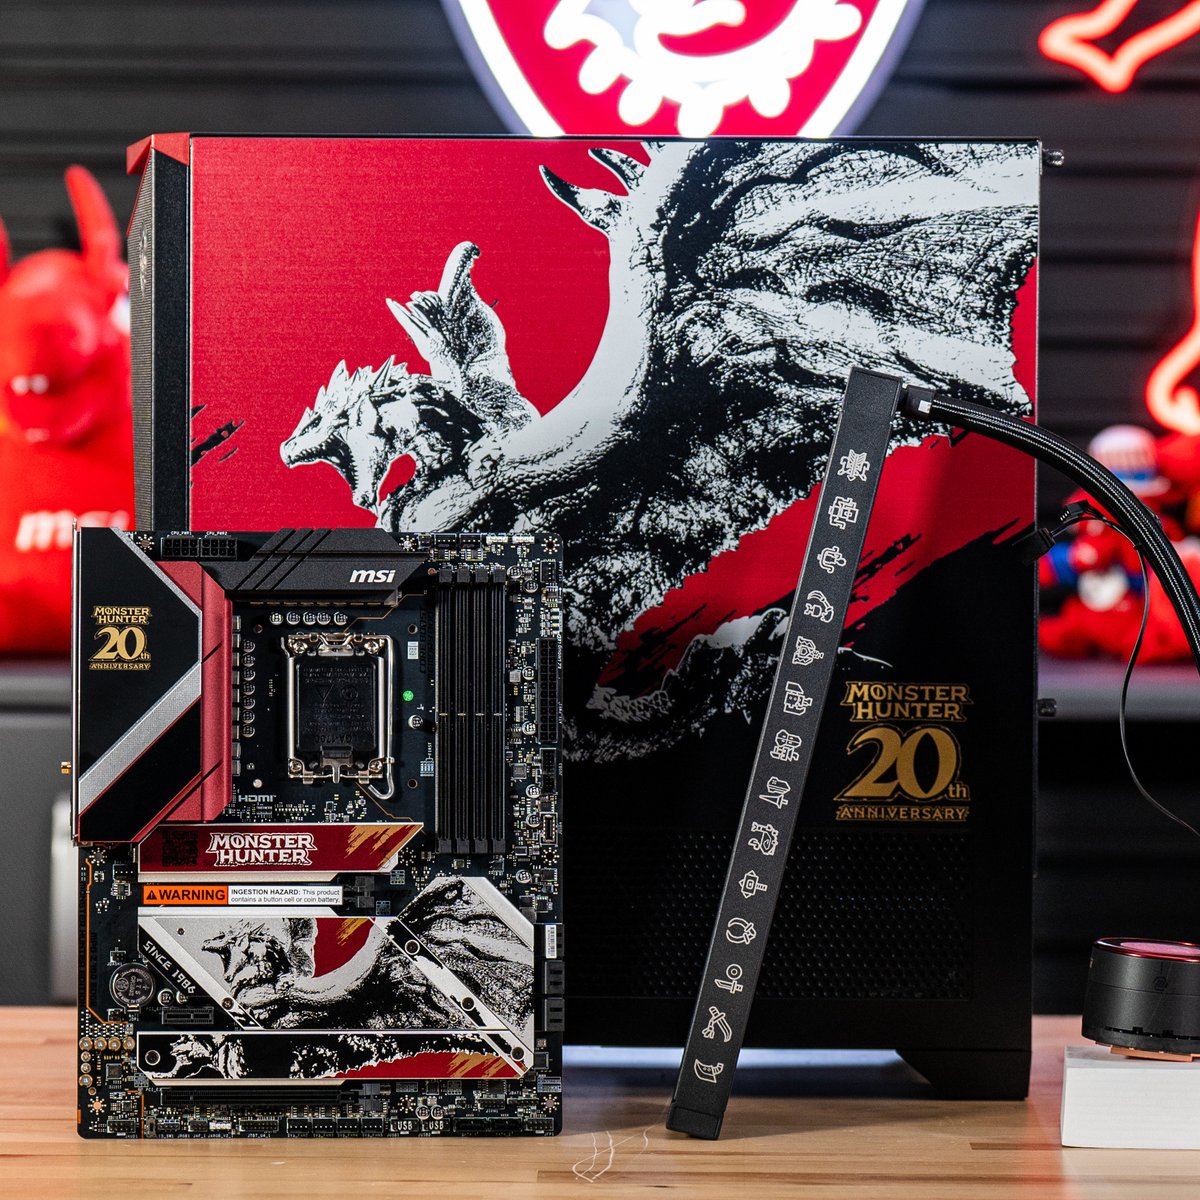 It just keeps getting better and better! 🙌 Our 2nd bundle comes with our limited edition Monster Hunter motherboard, case, and liquid cooler! This completes the full Rathalos inspired PC build! 🔥 #MSI #MSIGaming #Desktop #PC #Gaming #MonsterHunter